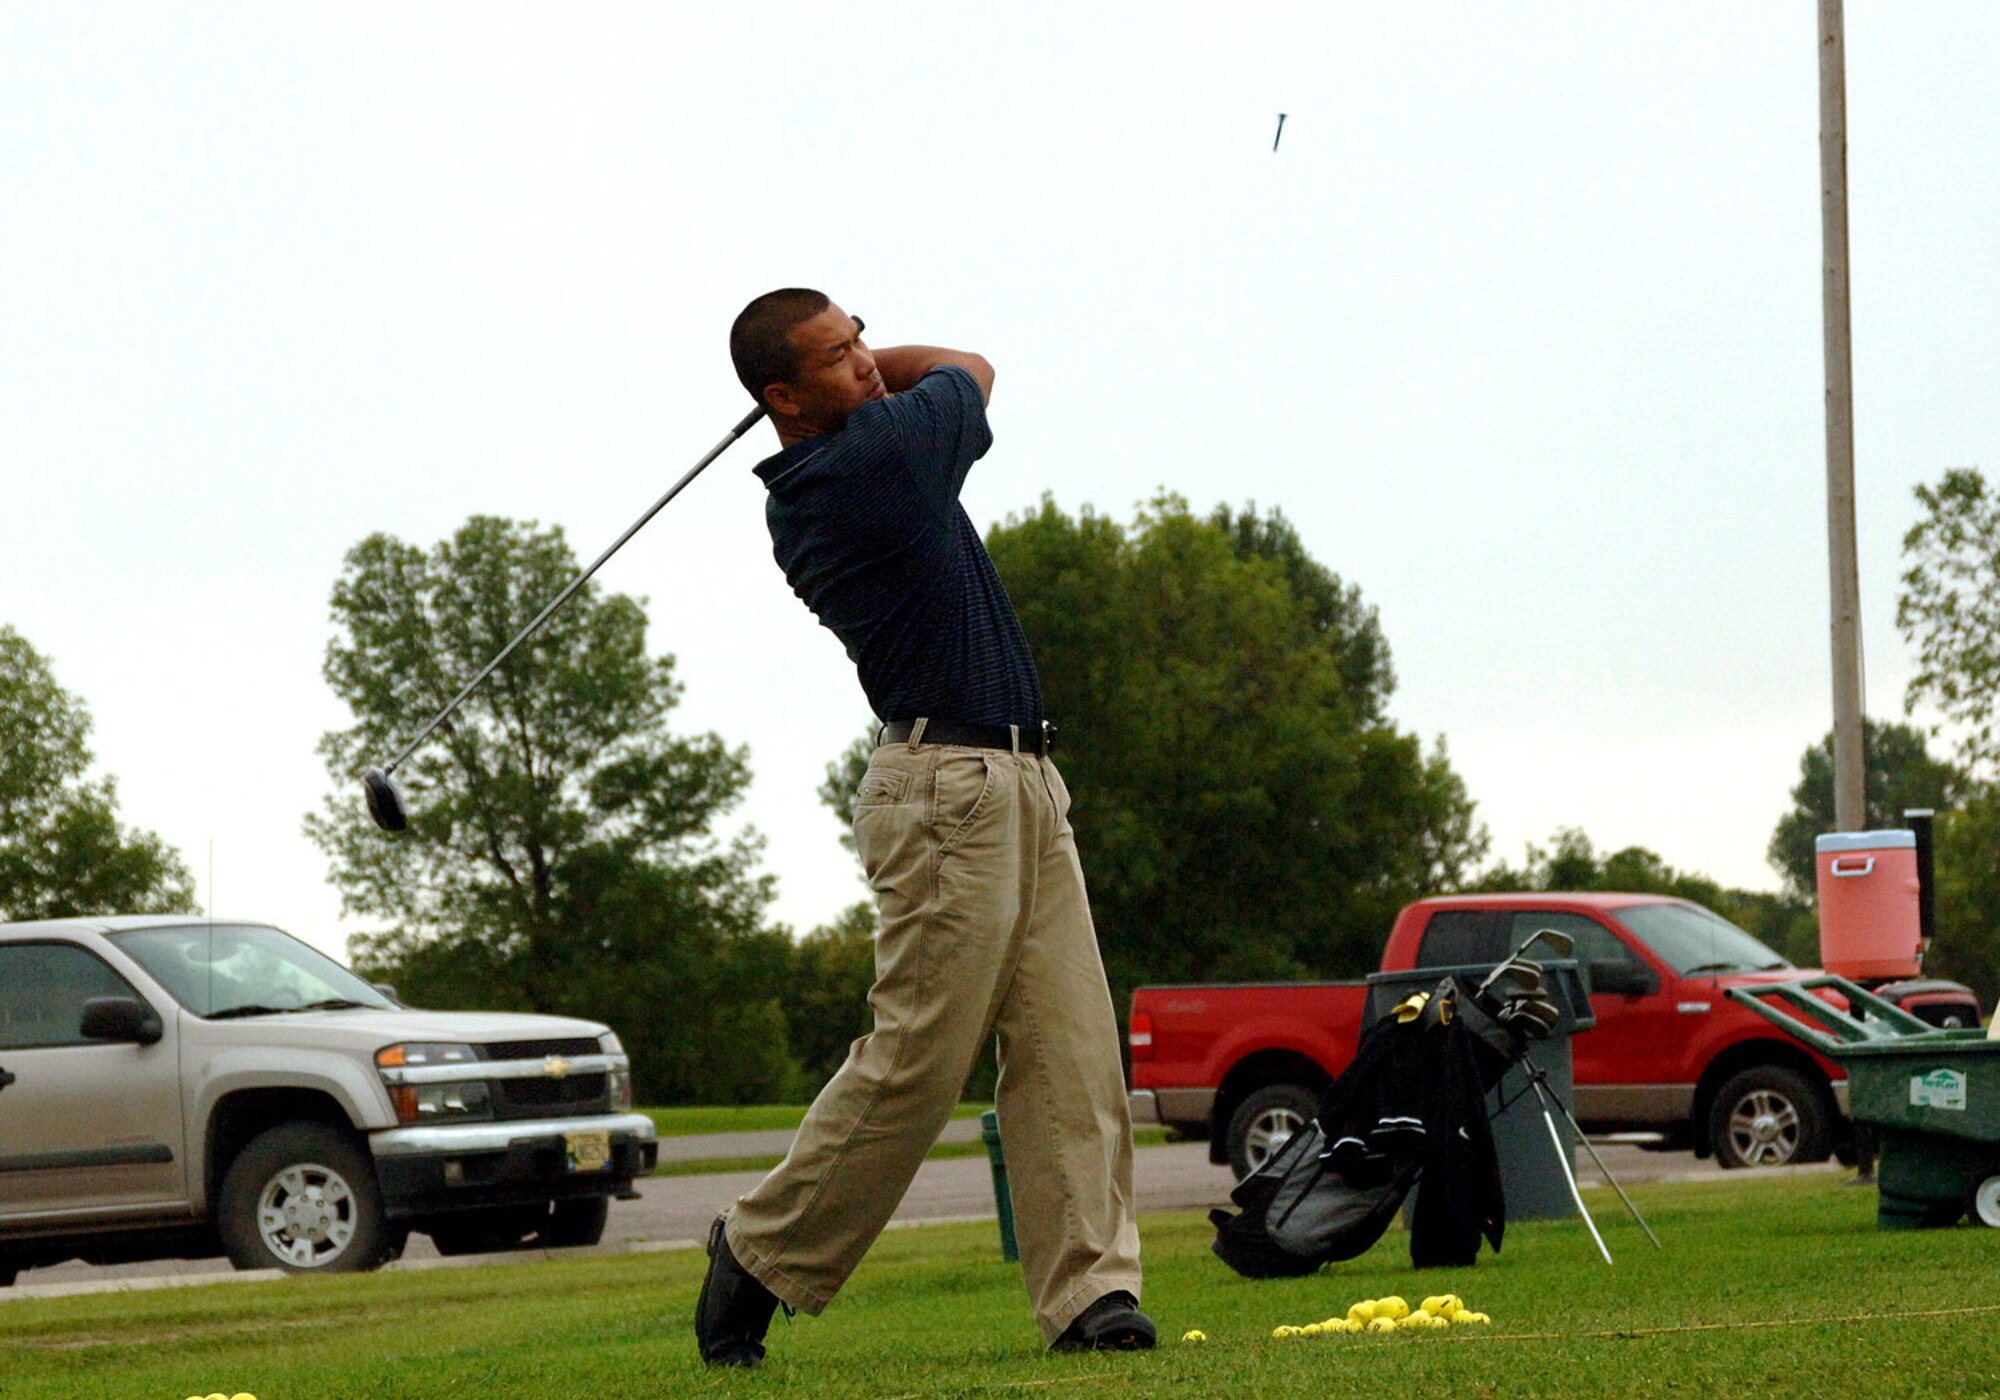 GRAND FORKS AIR FORCE BASE, N.D. -- A tee falling back to earth is all that remains after a drive by Maj. Steven Dougherty, 319th Air Refueling Wing Inspector General office, during practice at the driving range prior to the annual Grand Forks Military Appreciation Committee golf tournament. Teams comprised of both military and civilian leaders, spent the morning of Aug. 6 in friendly competition including longest drive, longest putt and closest to the hole contests. (U.S. Air Force photo/Senior Airman SerMae Lampkin)